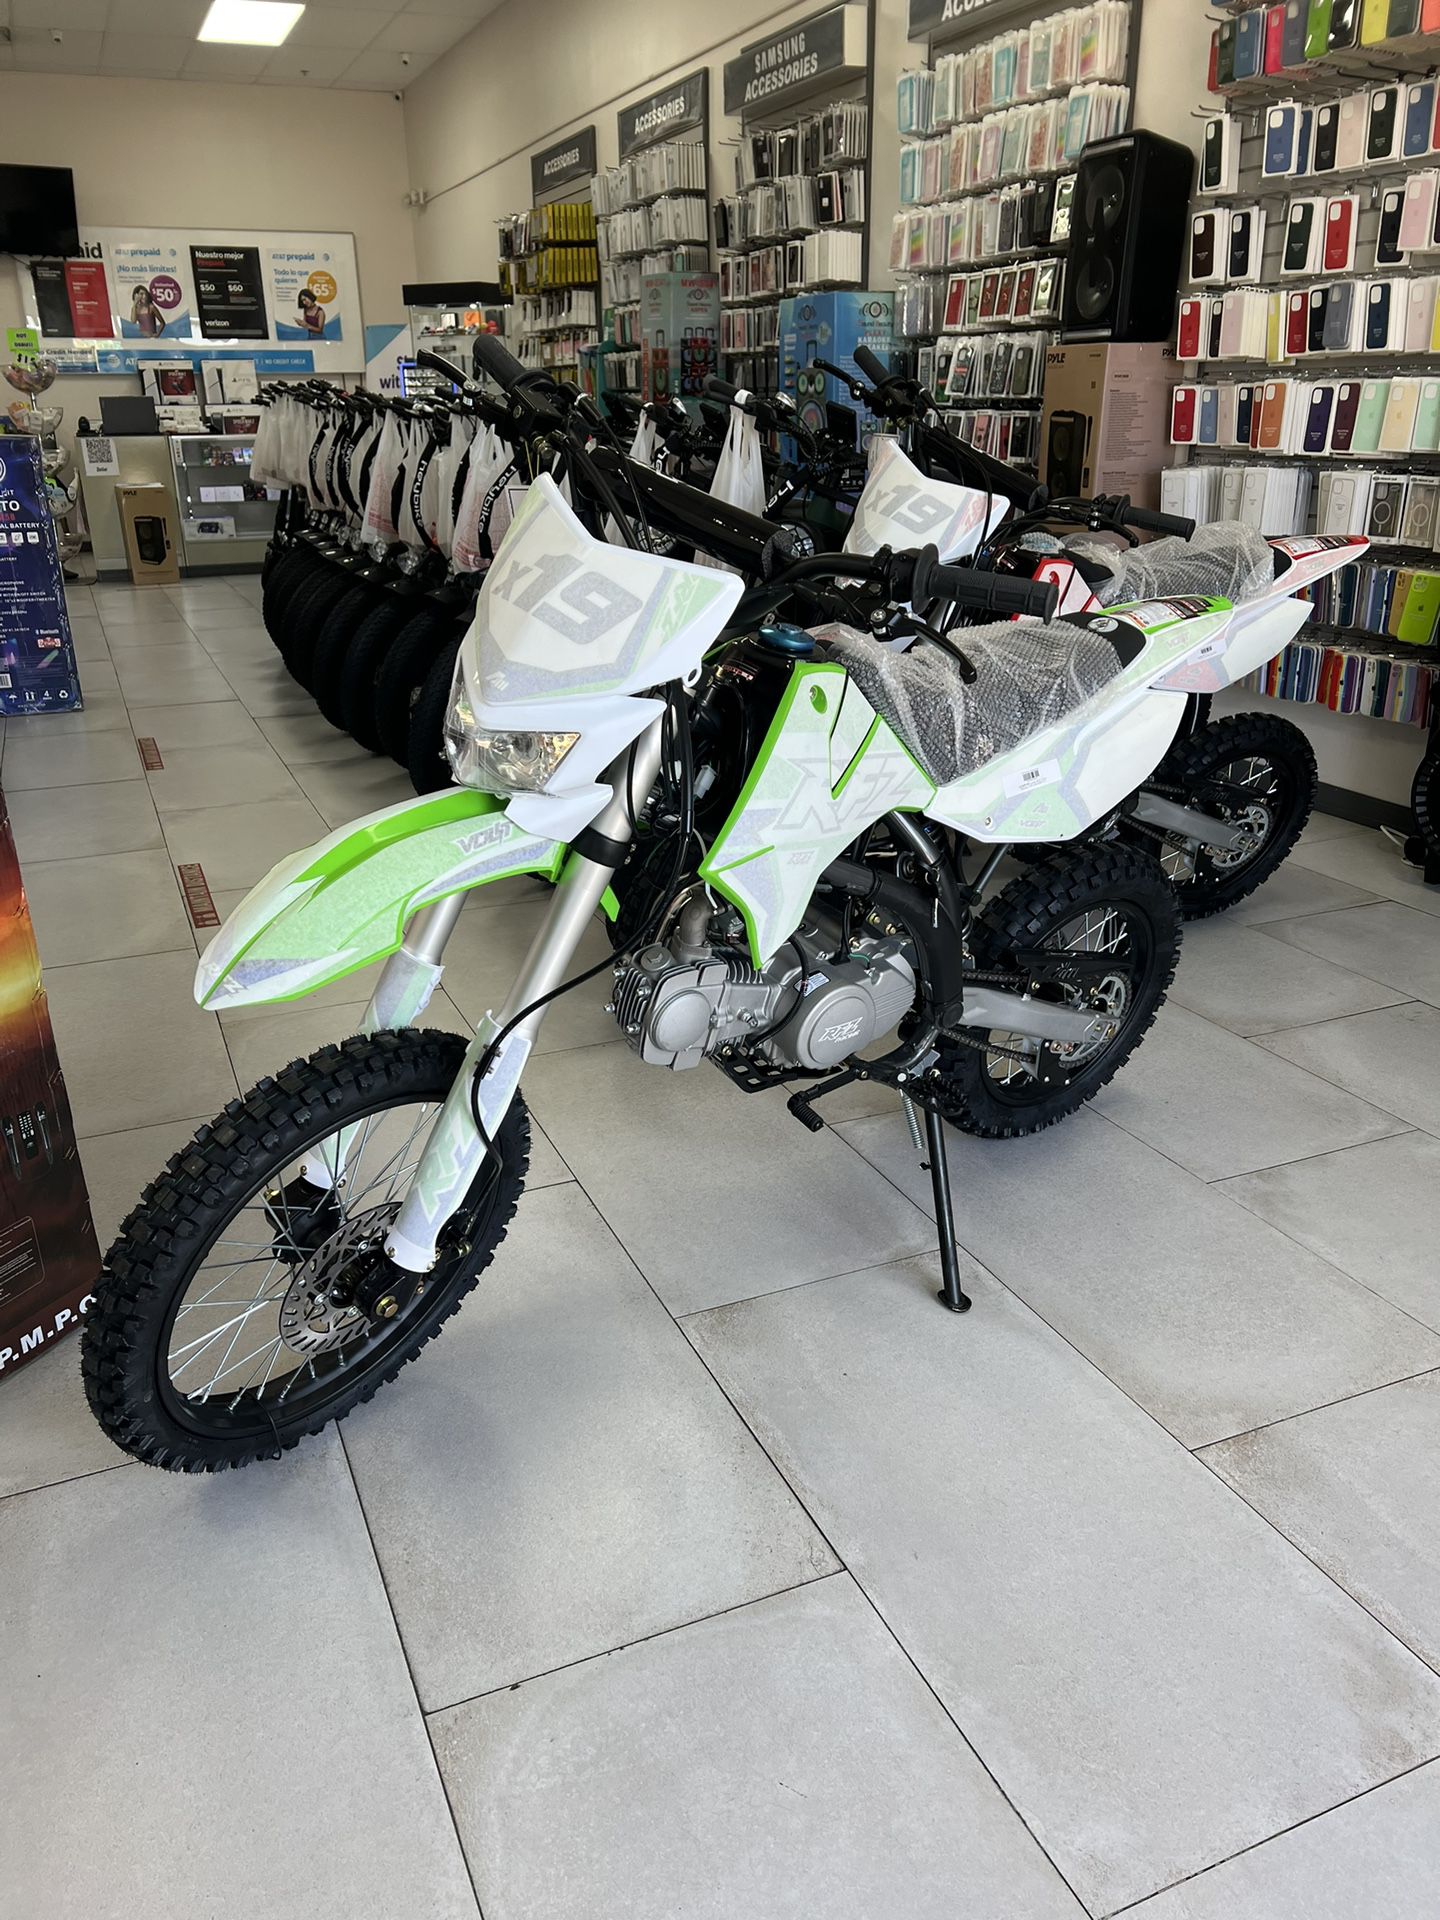 RFZ 125cc Dirt Bike New! Finance For $50 Down Payment!!